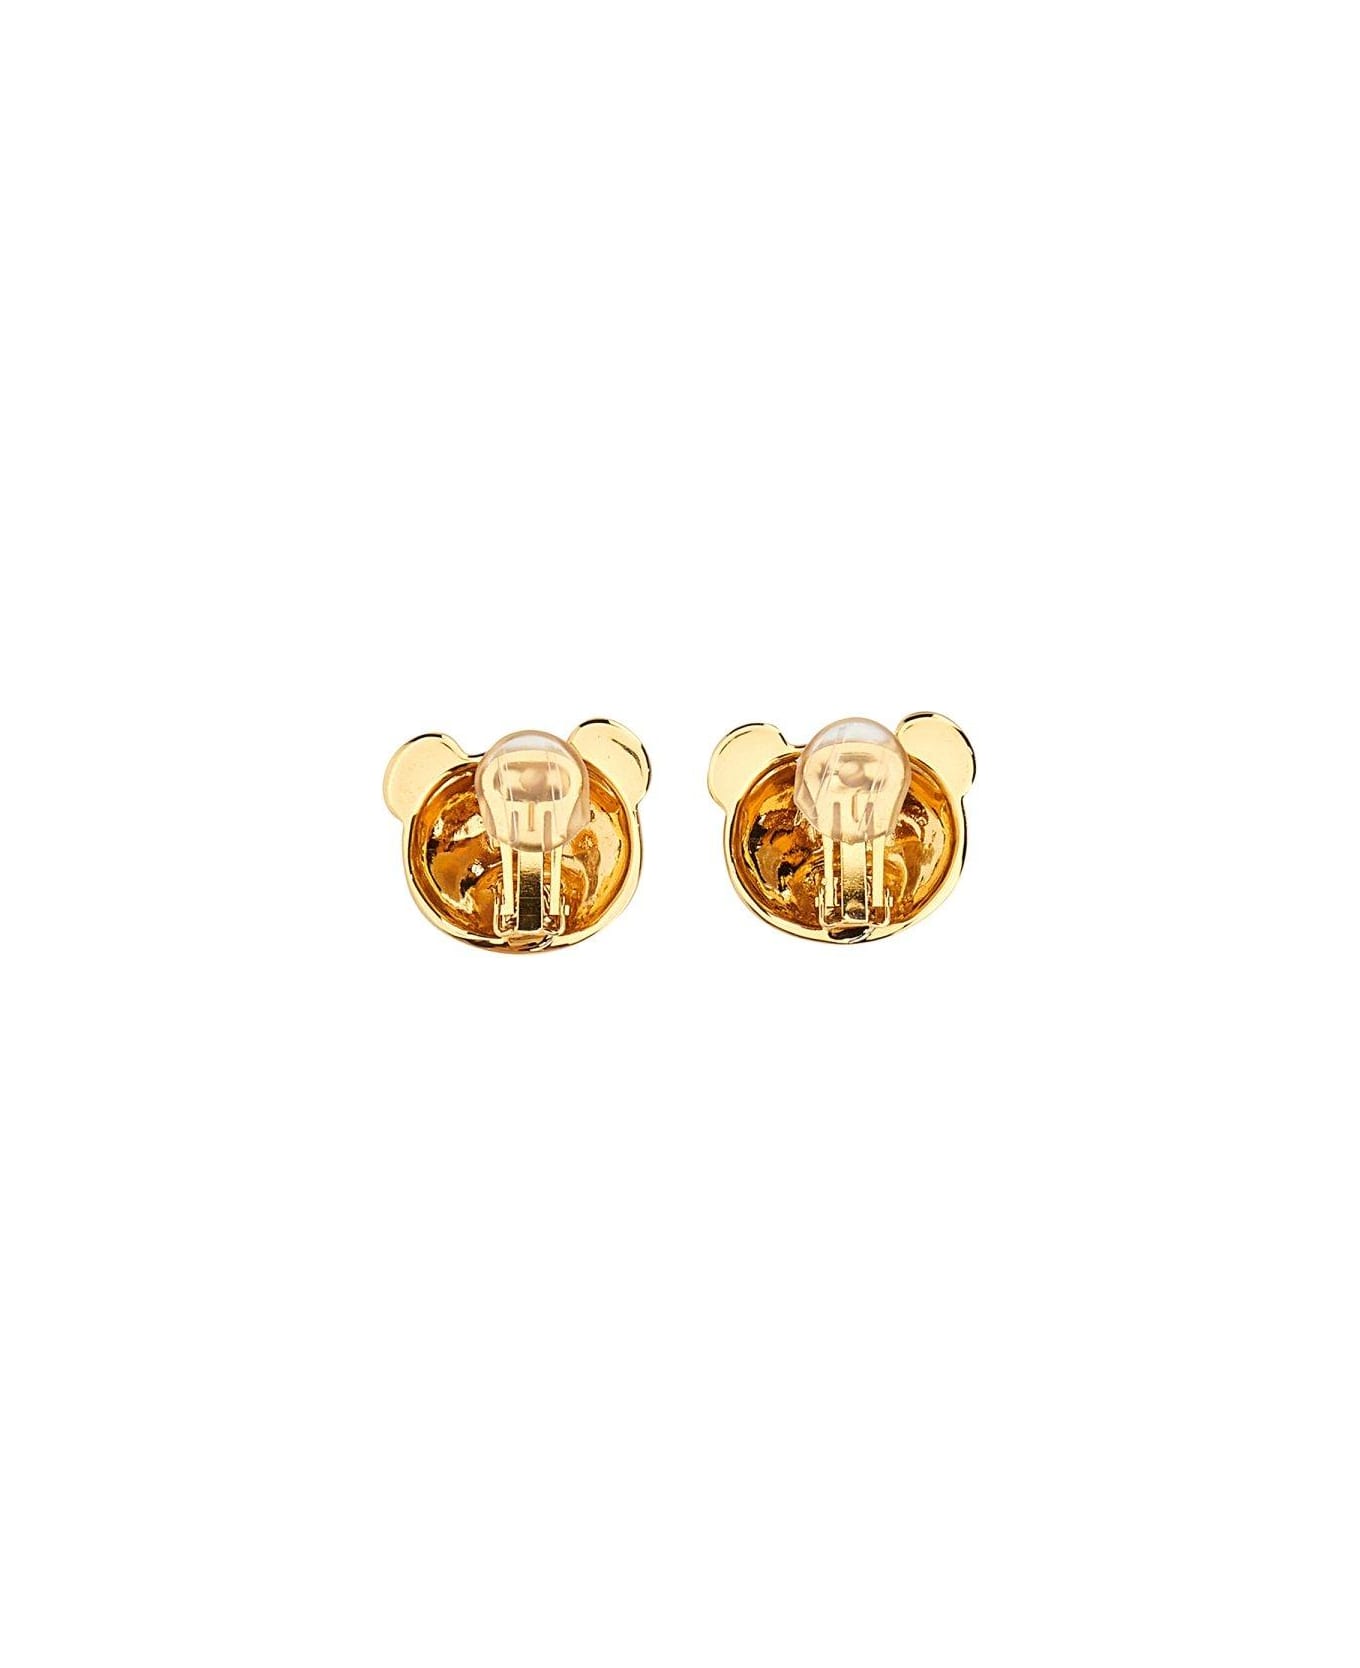 Moschino Teddy Bear Engraved Clip-on Earrings - GOLD イヤリング